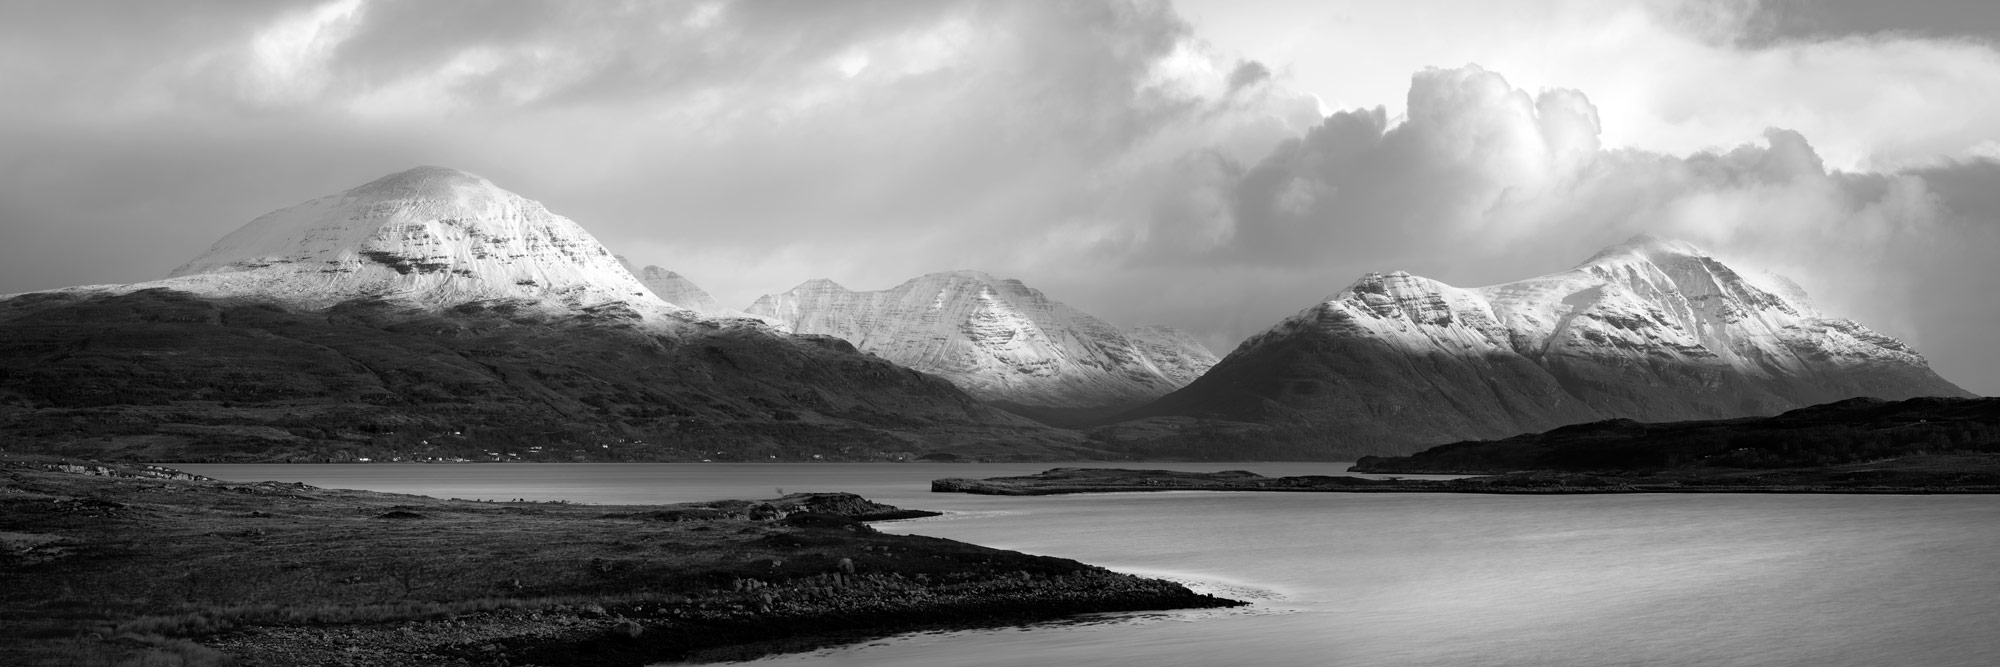 Panorama of Loch Torridon and Beinn Alligin and Liathach mountains in the Scottish highlands